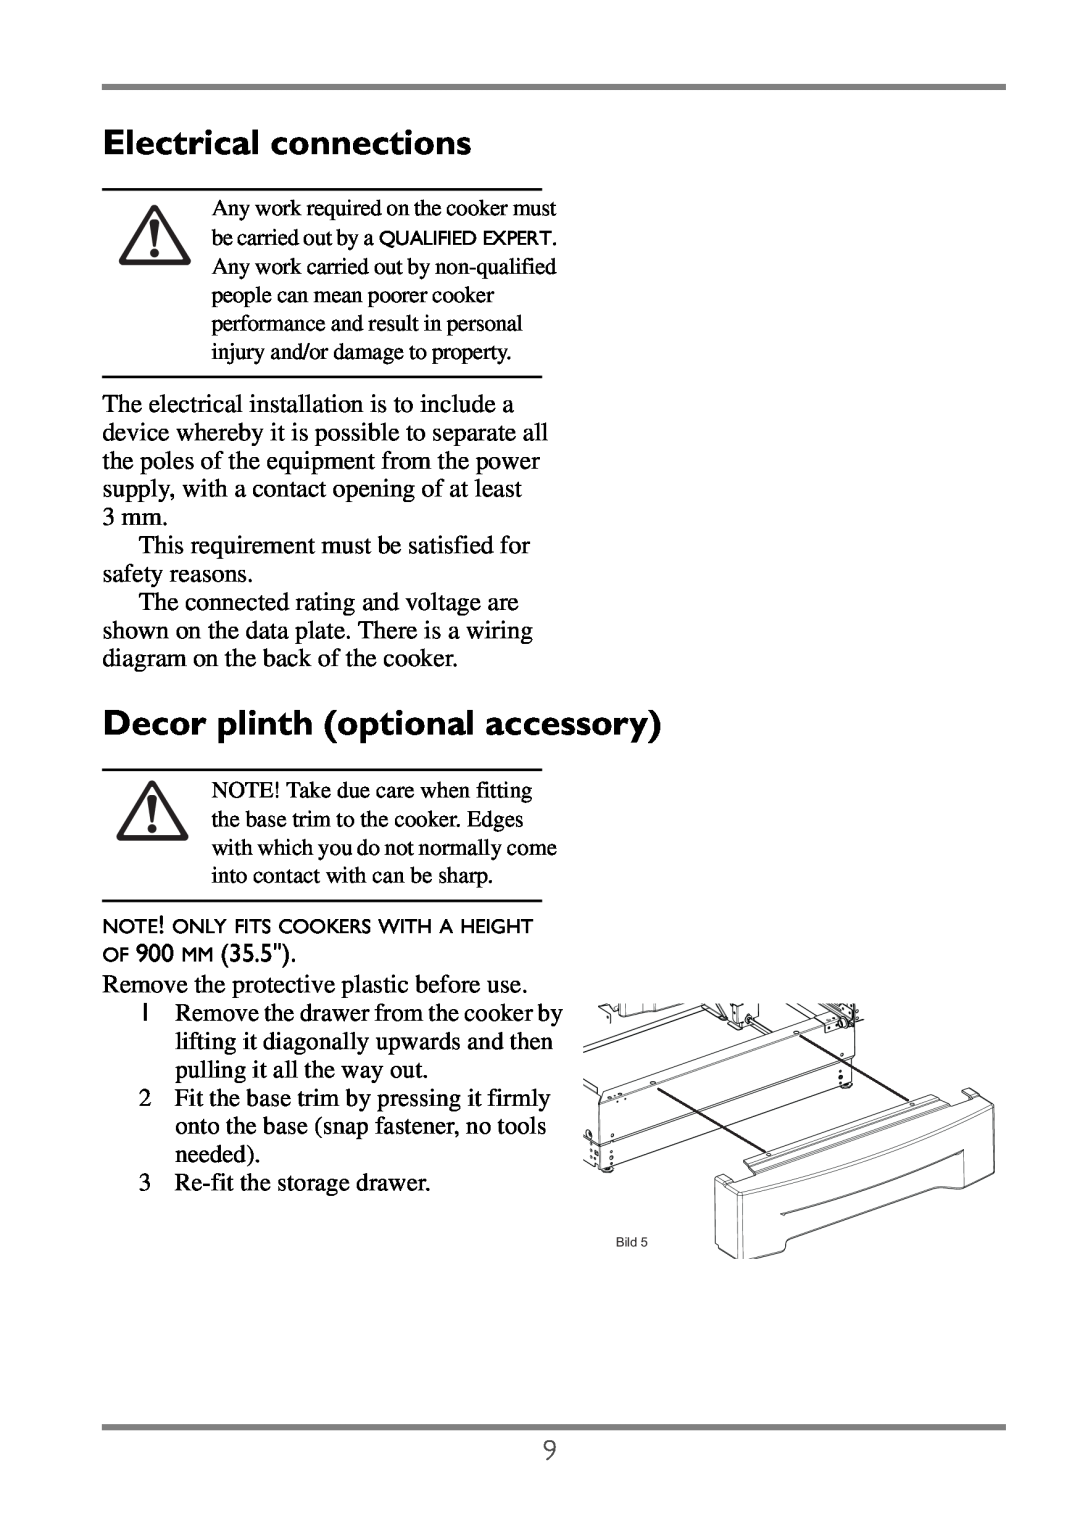 Electrolux EKC60752 user manual Electrical connections, Decor plinth optional accessory 